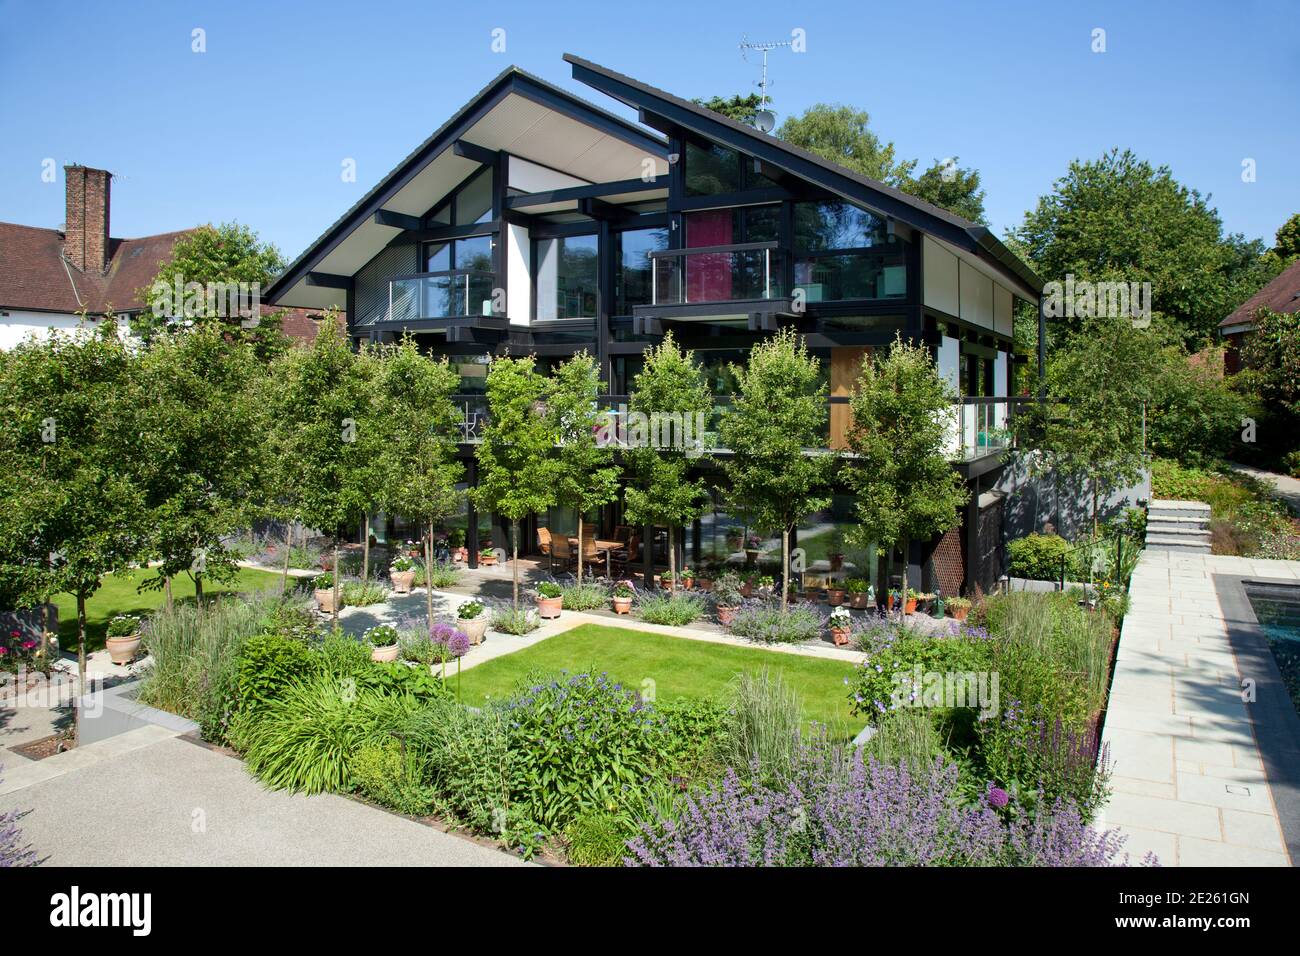 Rear elevation of Huf Haus with trees and landscaped garden Stock Photo